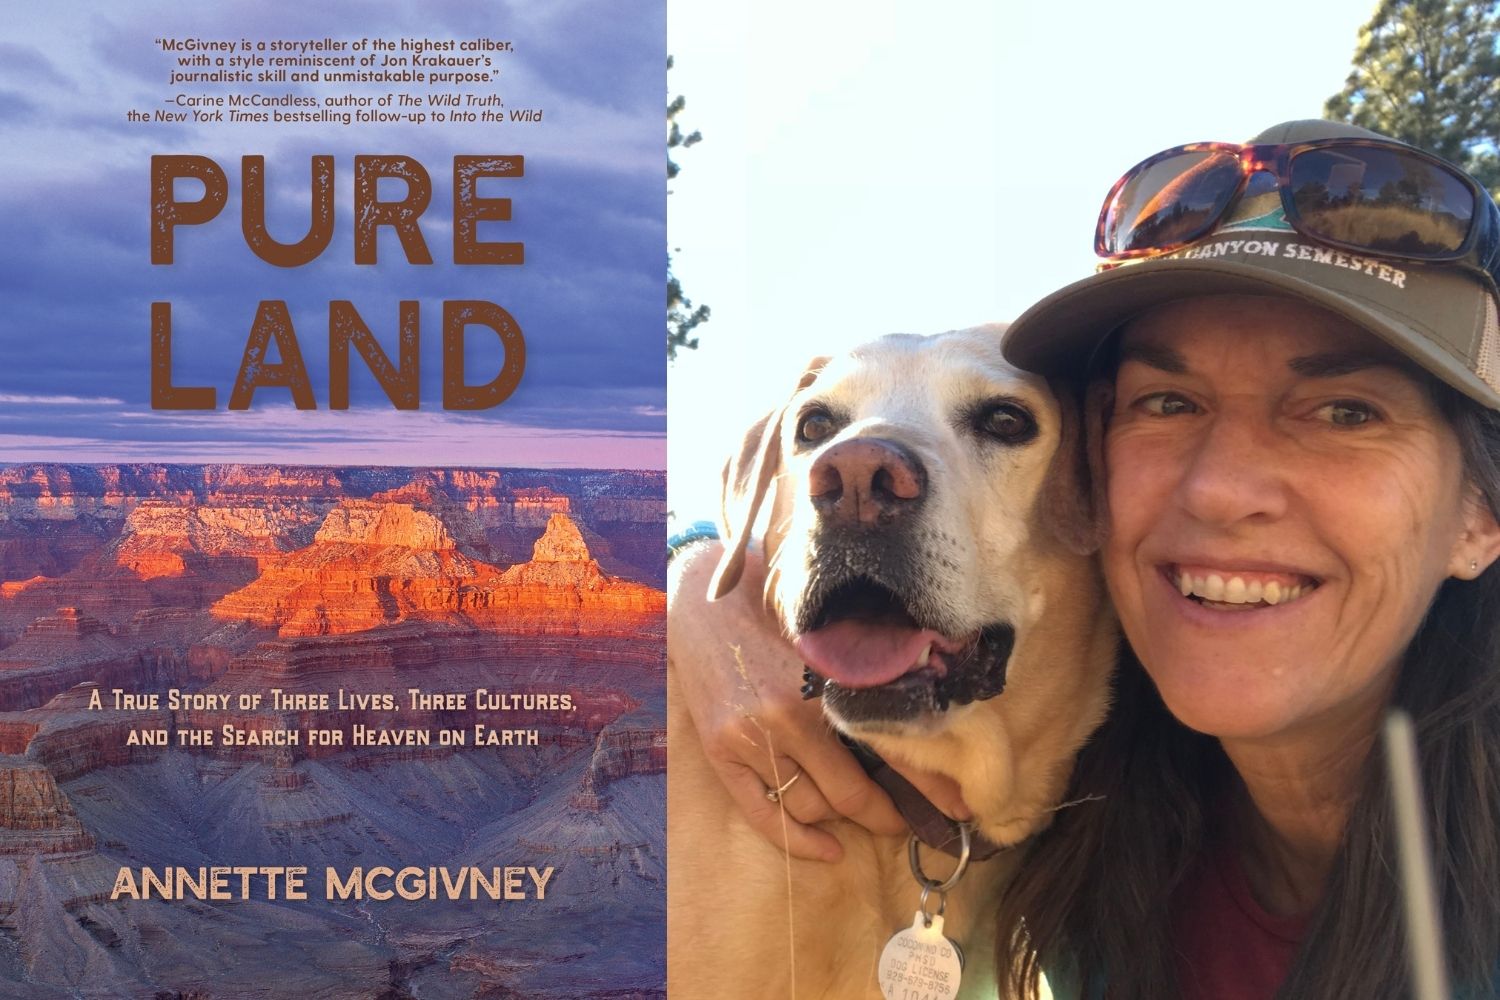 Annette McGivney, author of Pure Land